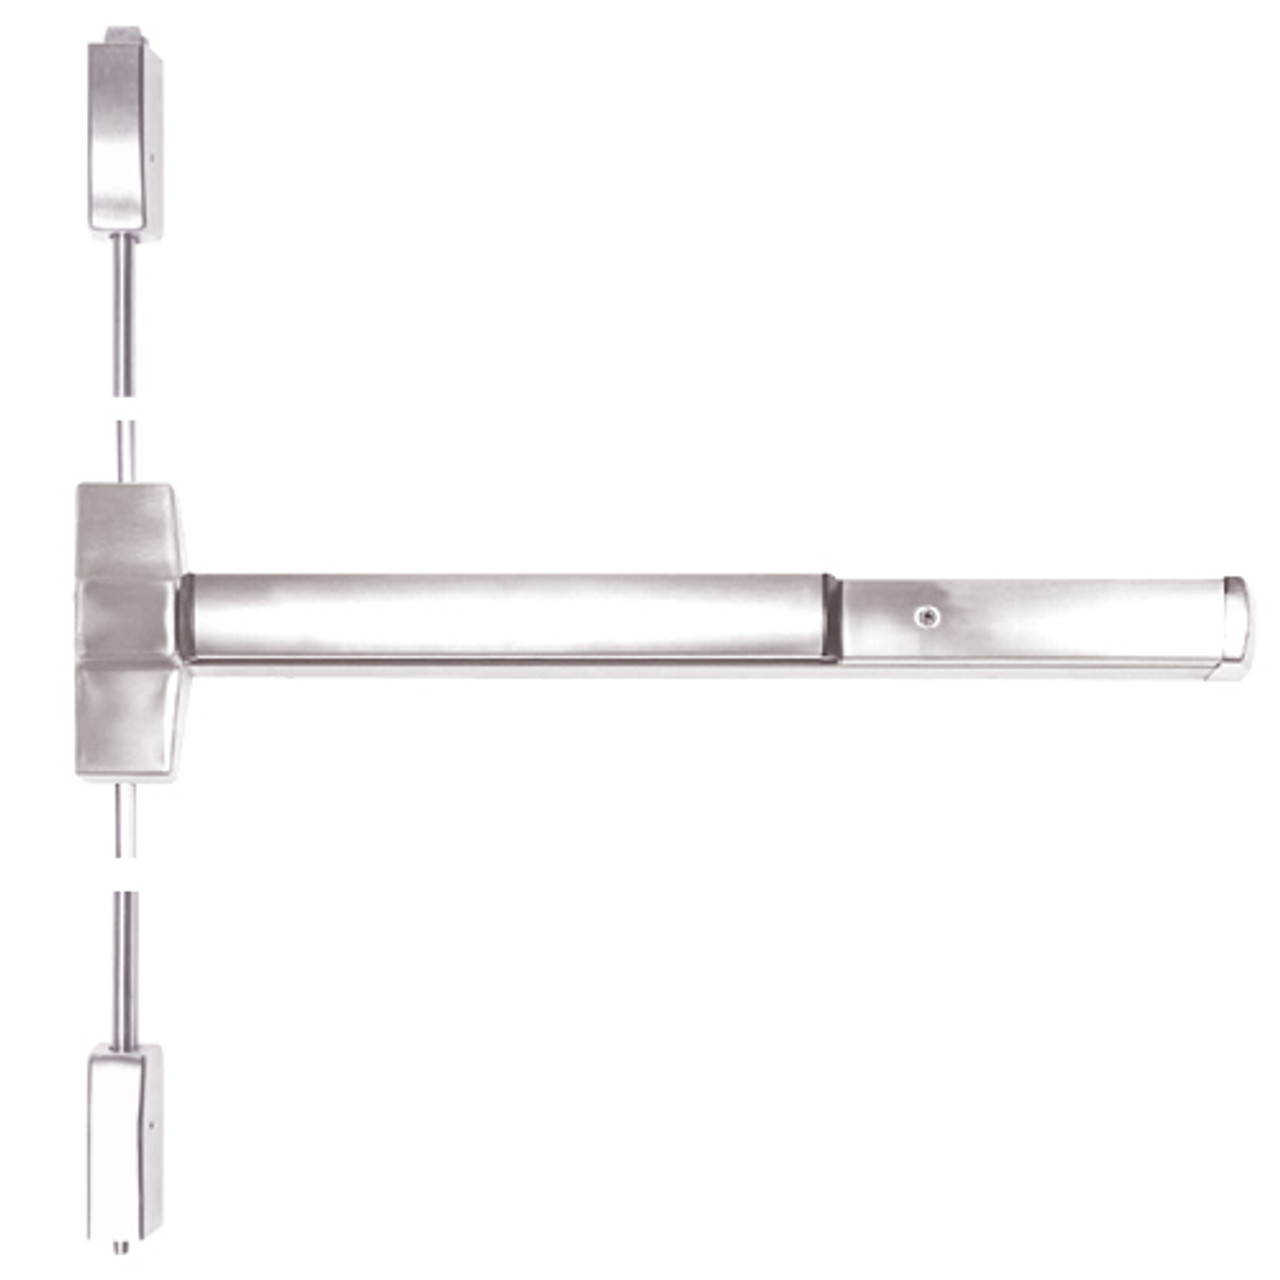 ED5470-629-MELR-M92 Corbin ED5400 Series Non Fire Rated Vertical Rod Exit Device with Motor Latch Retraction and Touchbar Monitoring in Bright Stainless Steel Finish